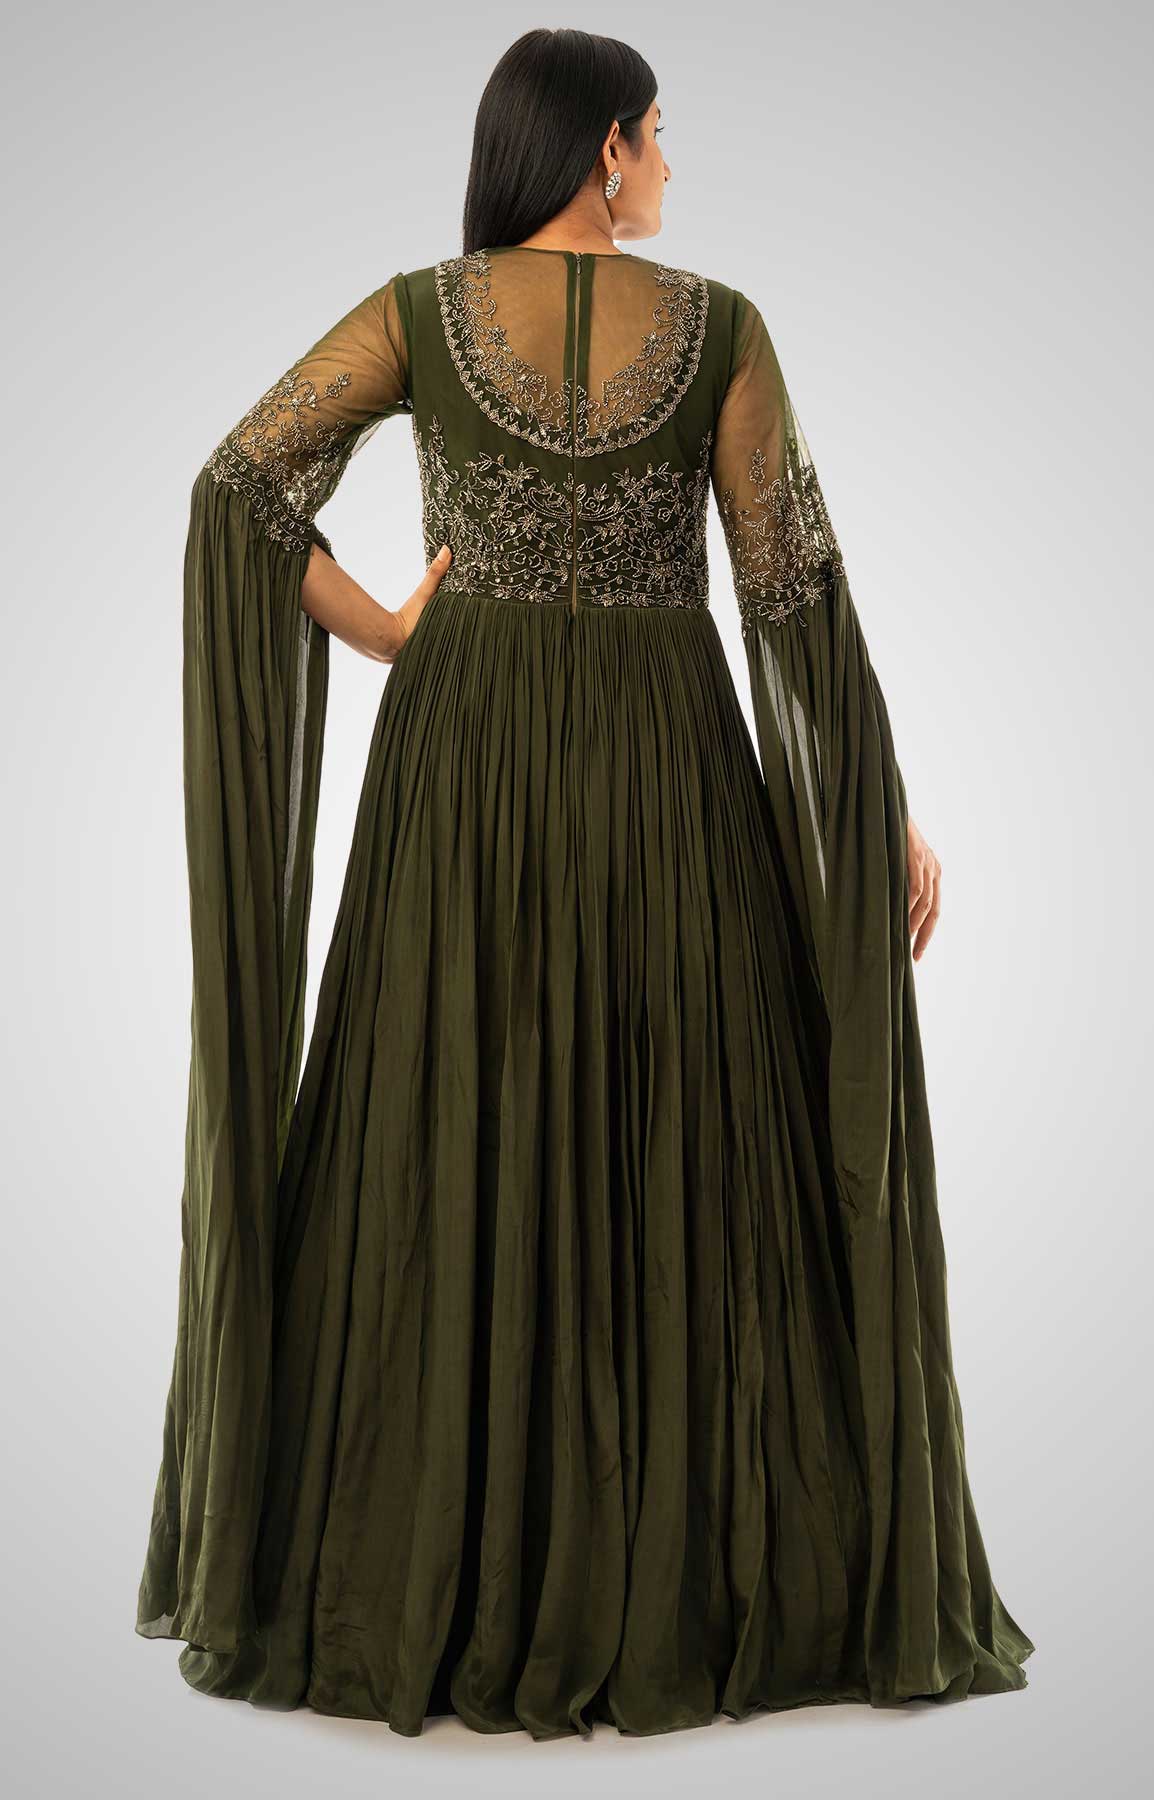 Olive Green Crepe Gown With Cape Style Sleeve And Embroidered Bodice – Viraaya By Ushnakmals